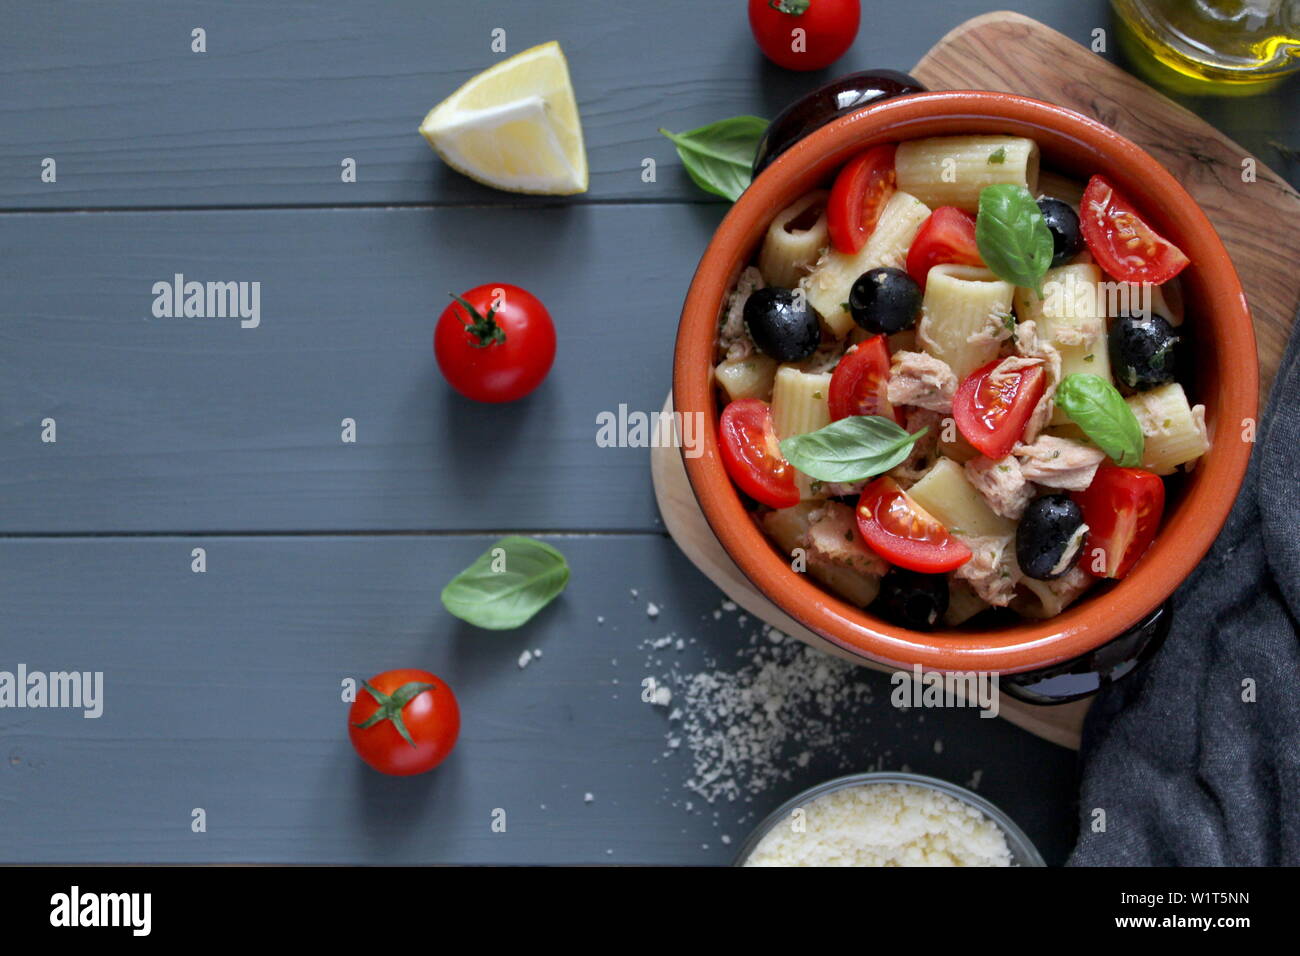 Pasta with tuna, tomato, black olive and parmesan cheese on dark background. Top view with copy space. Stock Photo